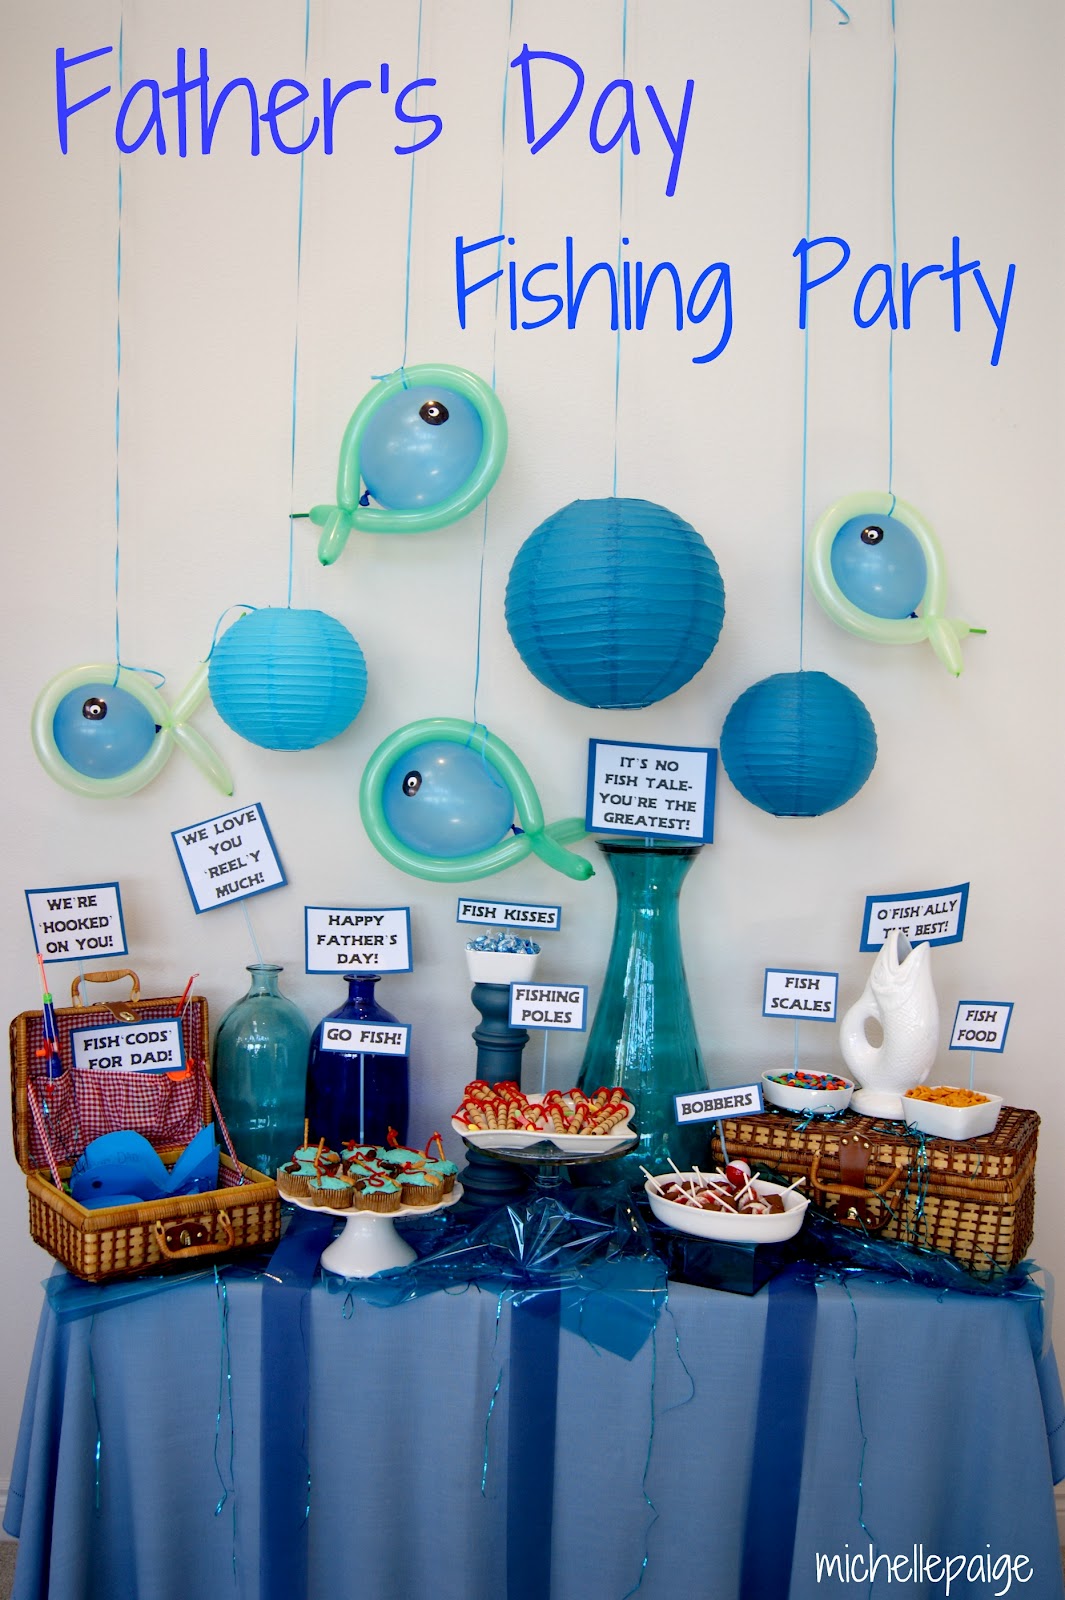 michelle paige blogs: Father's Day Fishing Party